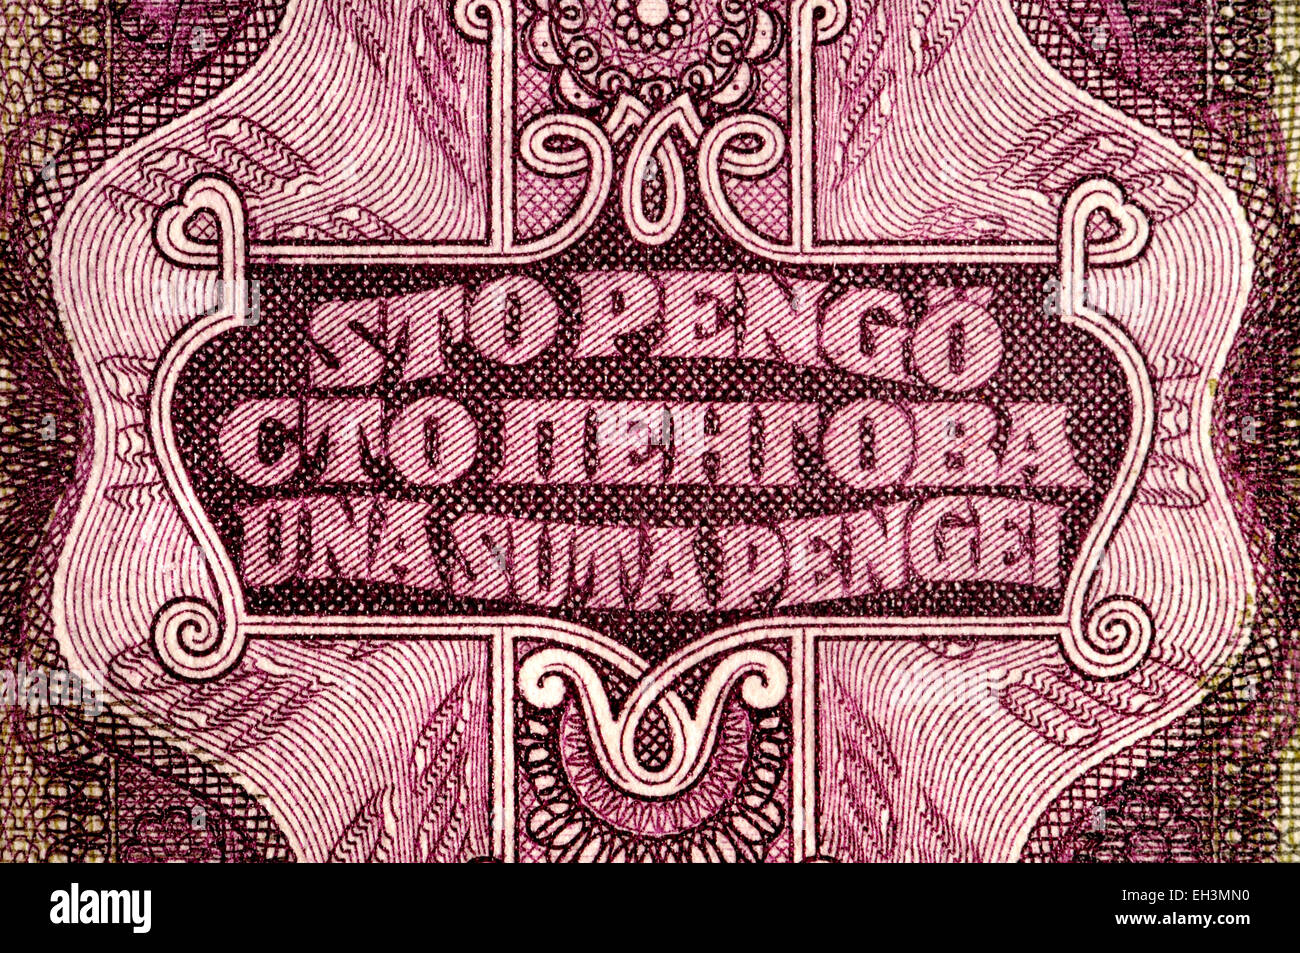 Detail from a 1930 Hungarian 100 Pengo banknote showing text for '100 Pengo' in Czech, Russian and Romanian Stock Photo